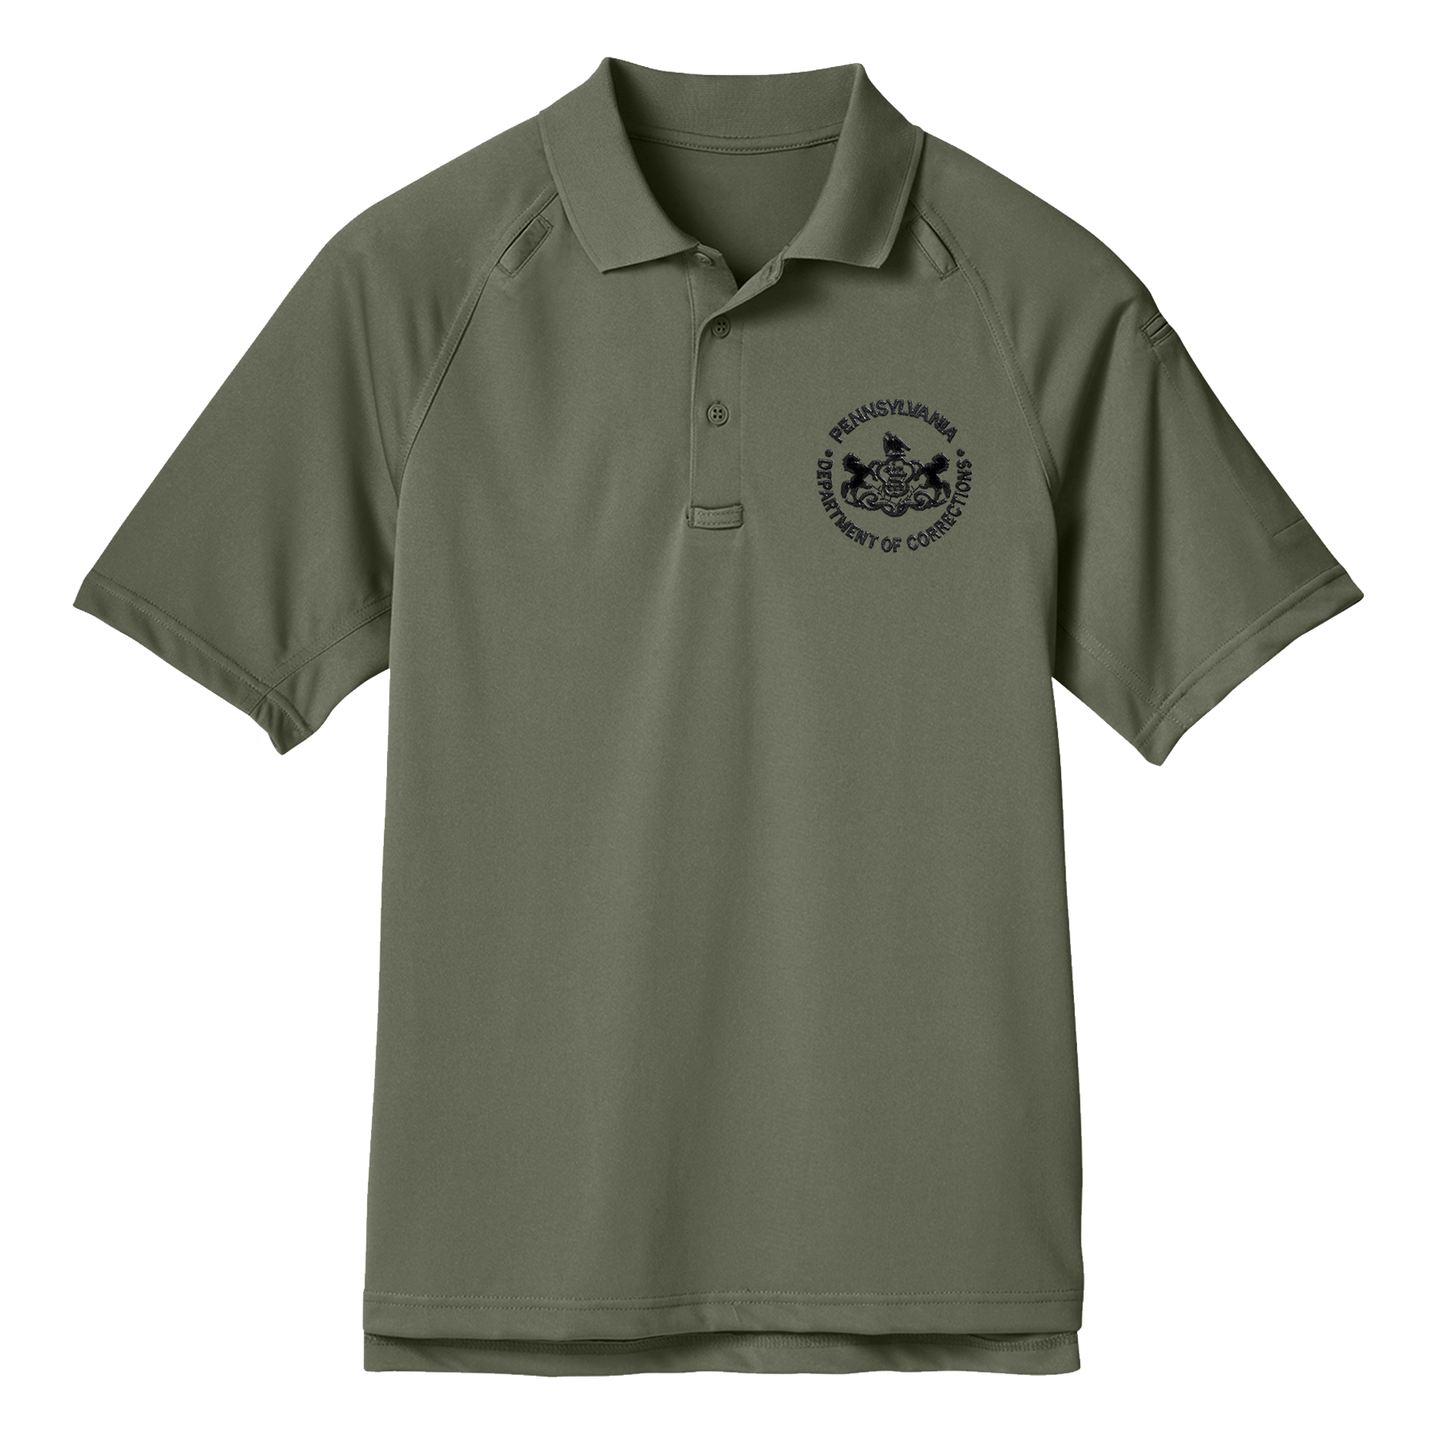 Adult Tactical Short-Sleeve Polo with Embroidered Department of Corrections Logos (Various Colors)